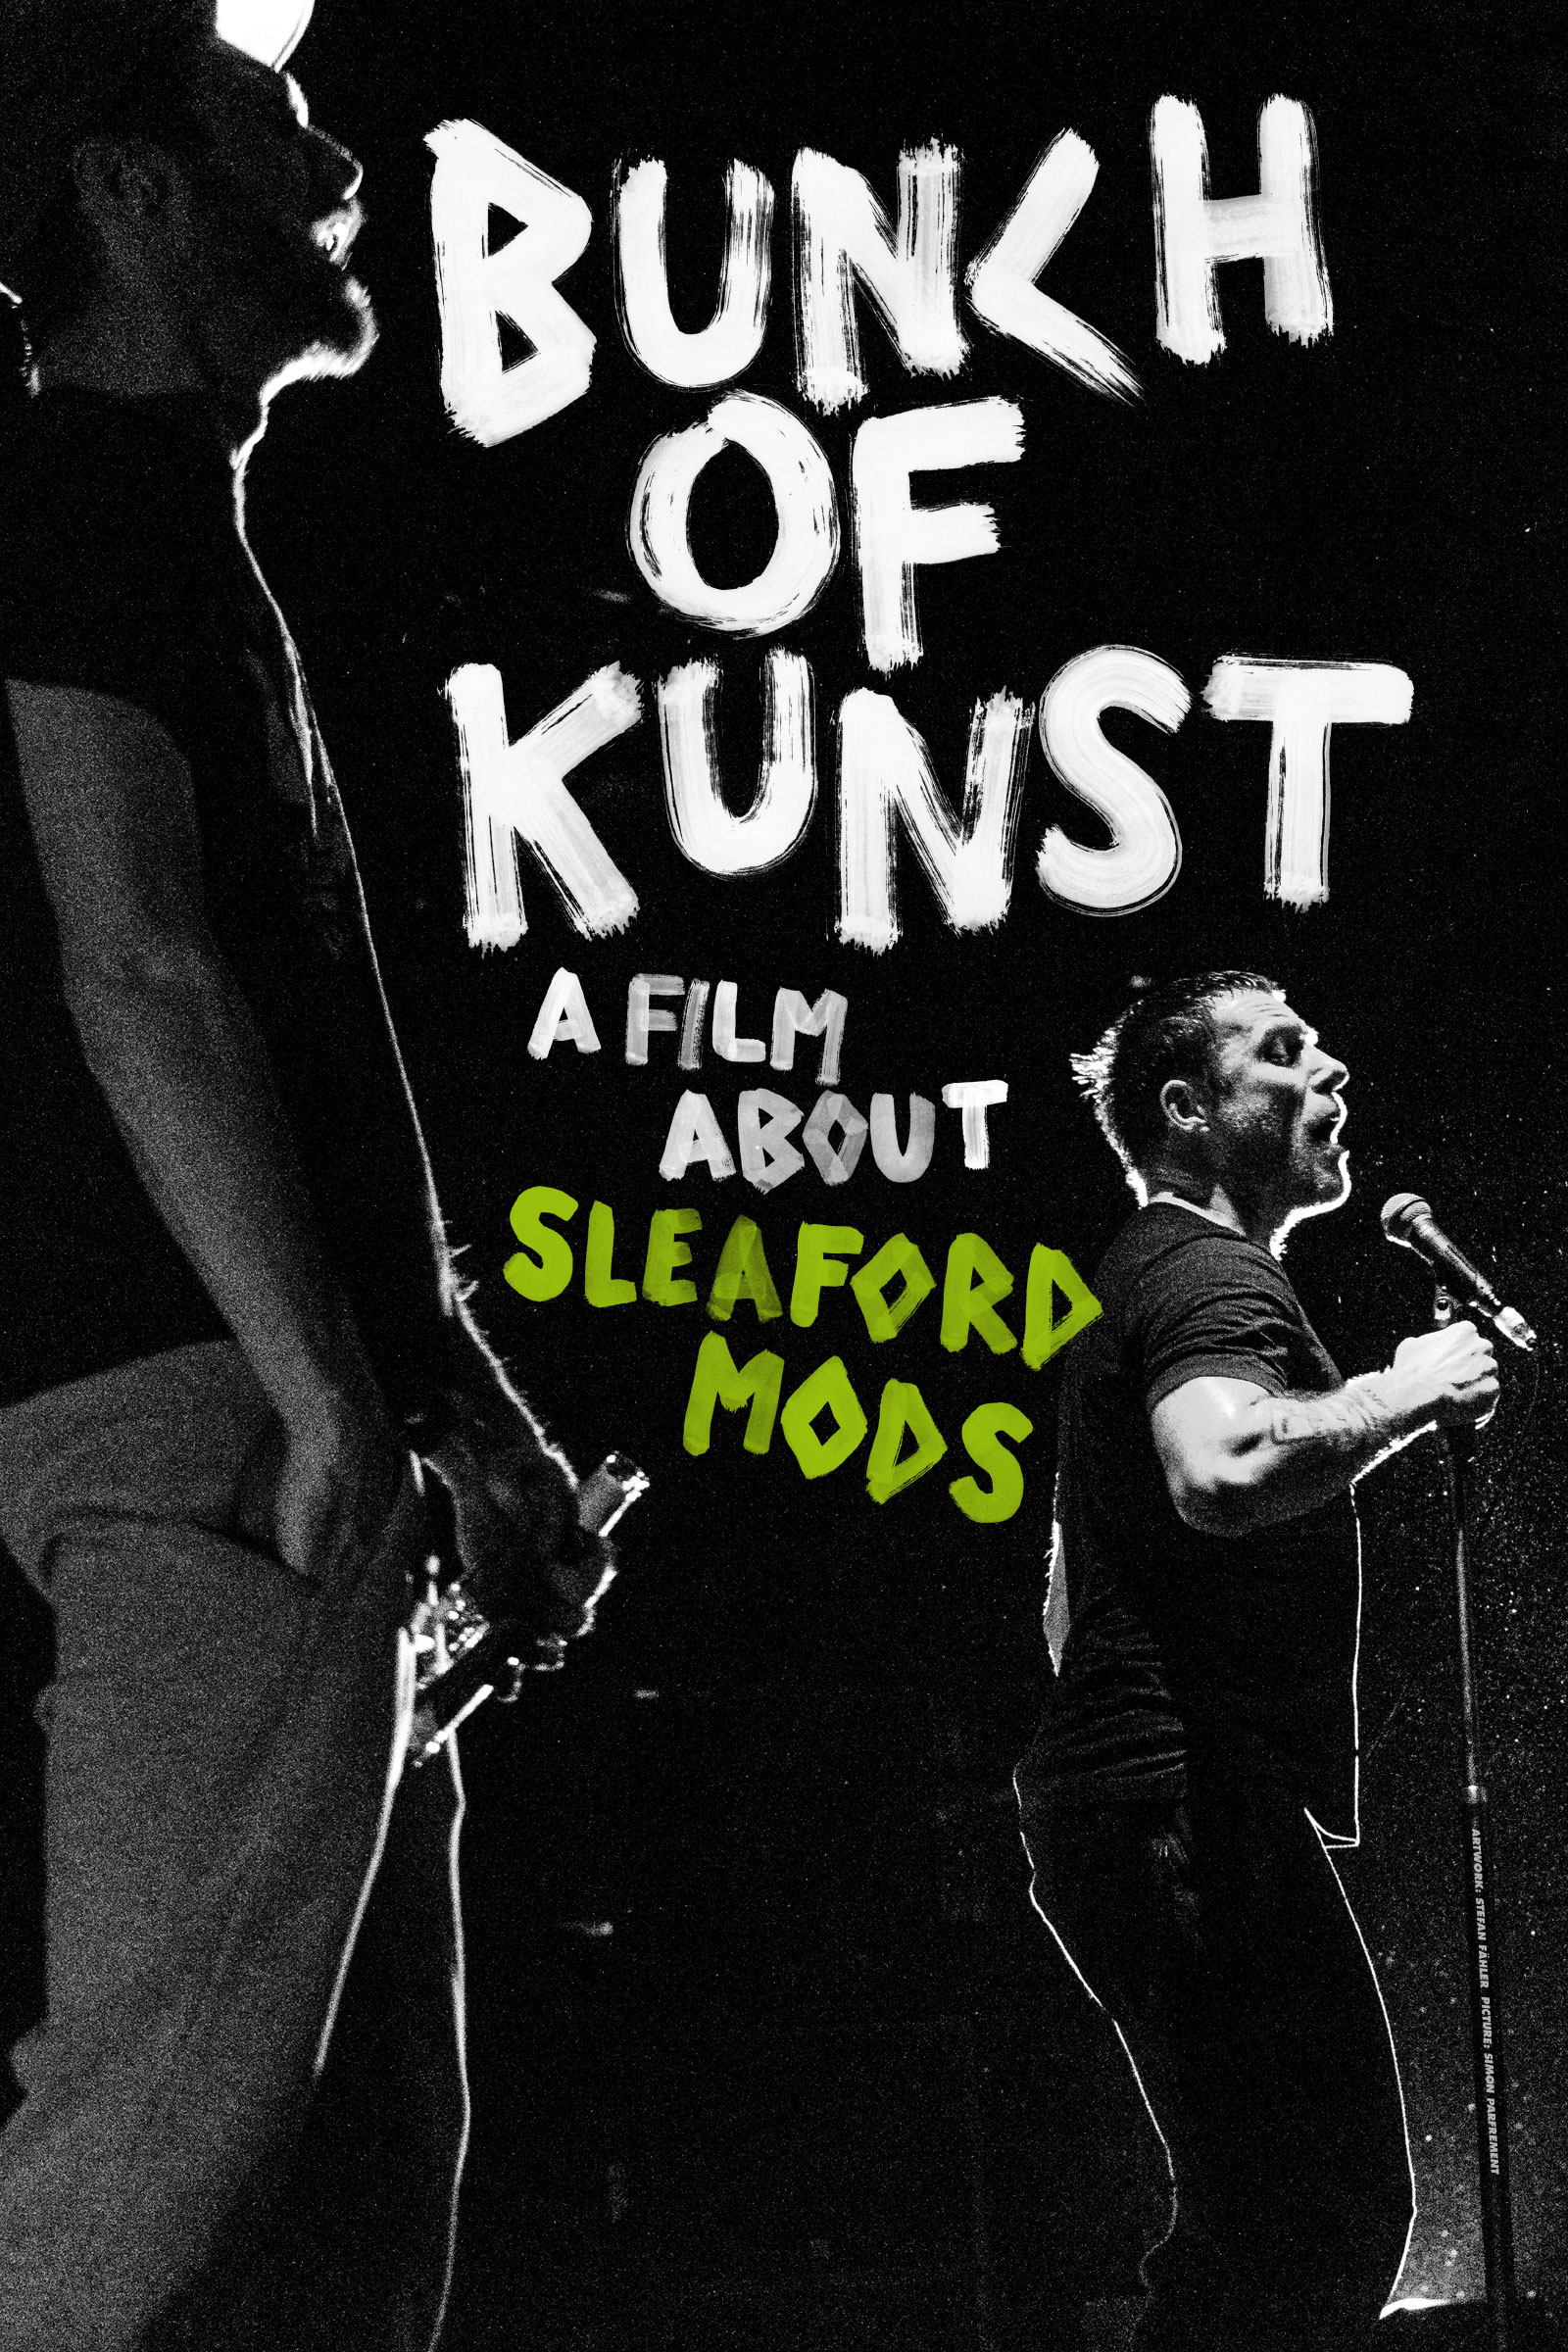 Where to stream Bunch of Kunst: A Film about Sleaford Mods